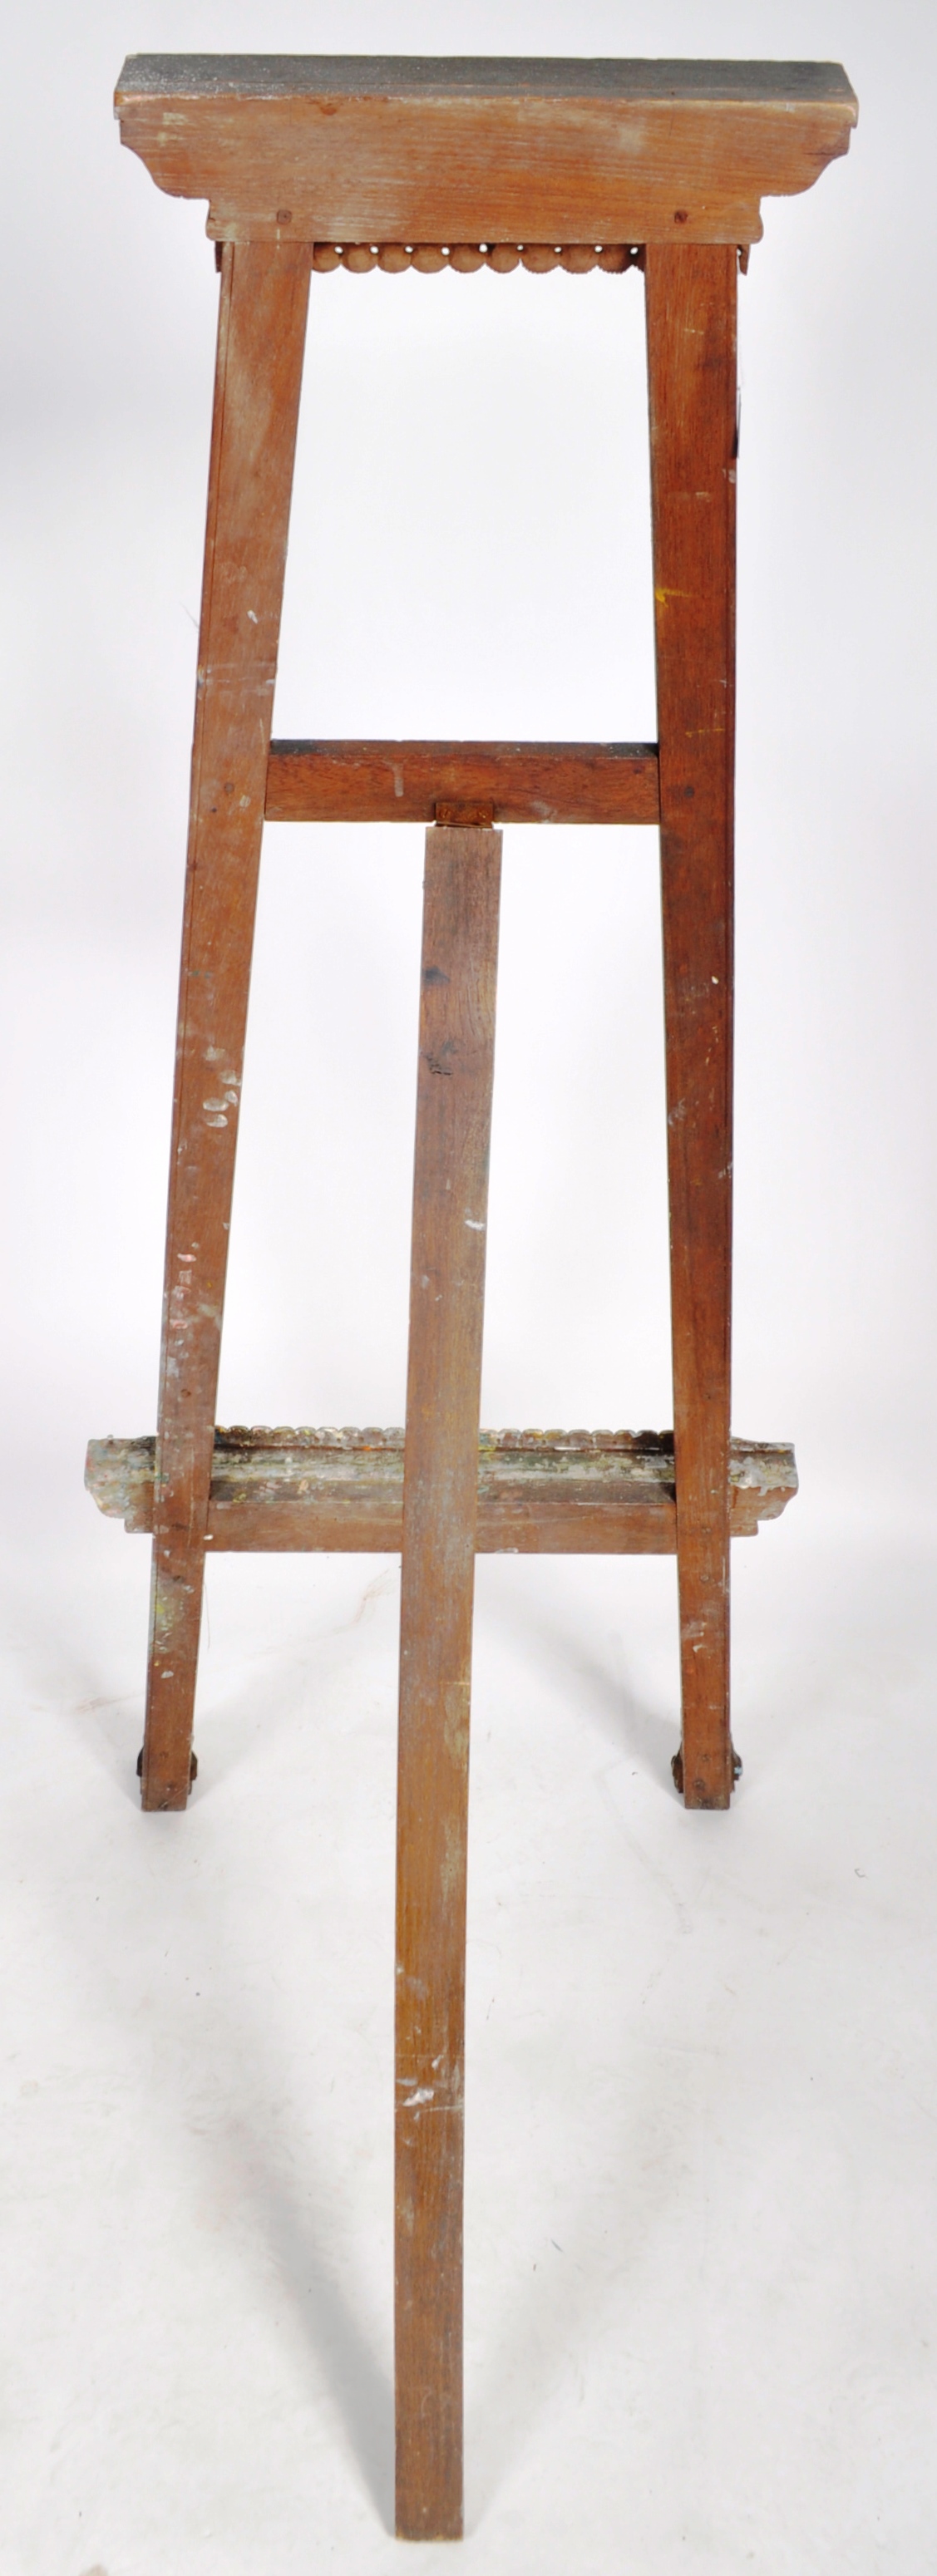 VINTAGE 20TH CENTURY ORIENTAL CARVED WOOD EASEL STAND - Image 13 of 13